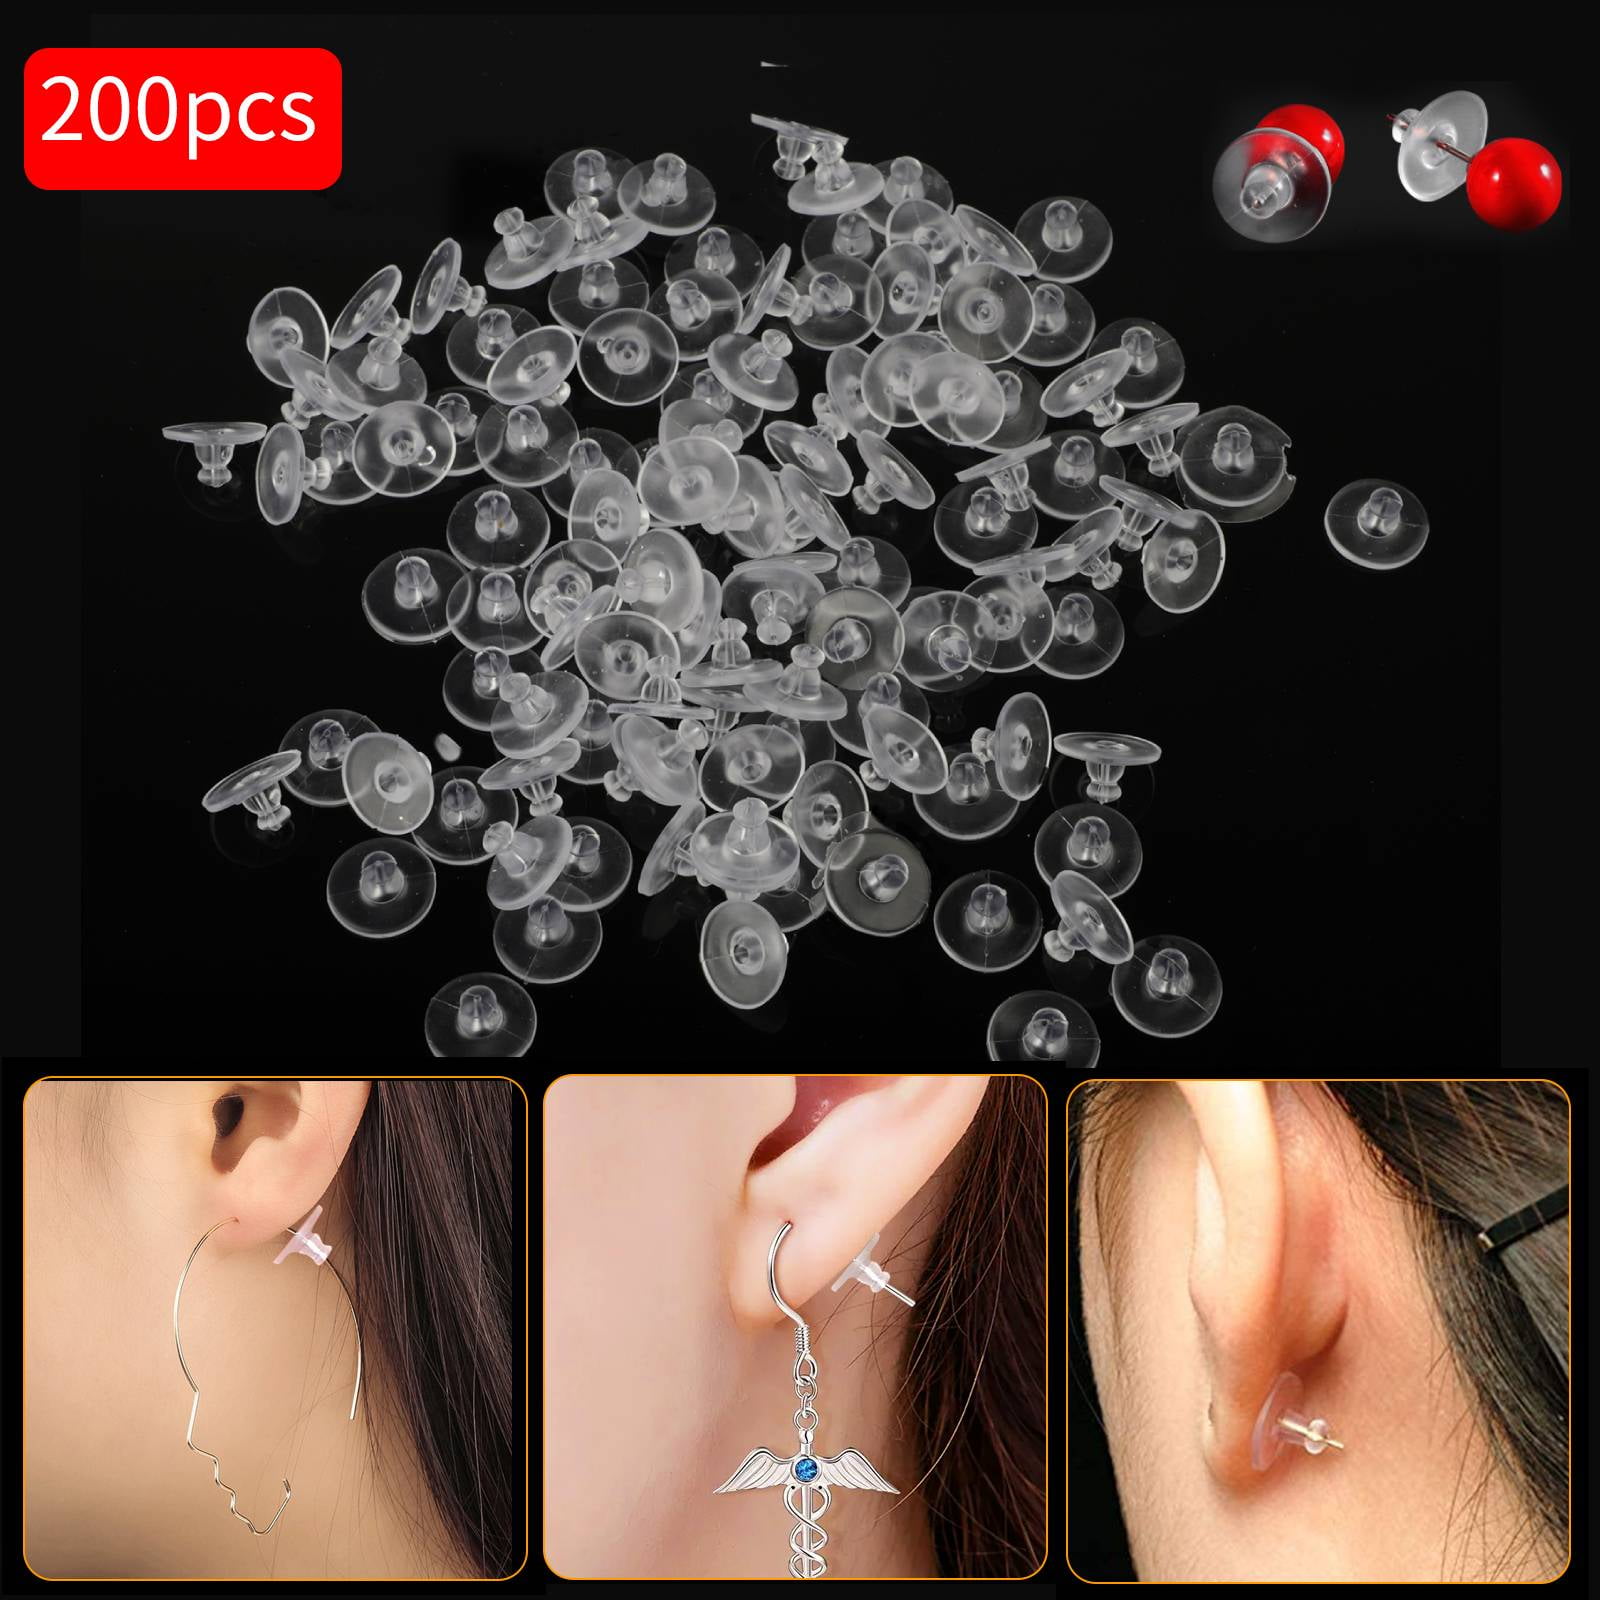 Zocita 100 Pcs Large Silicone Earring Backs with Pad, Safety Earring  Backings Bullet Clutch Stopper Replacement for Fish Hook Earrings Studs  Hoops